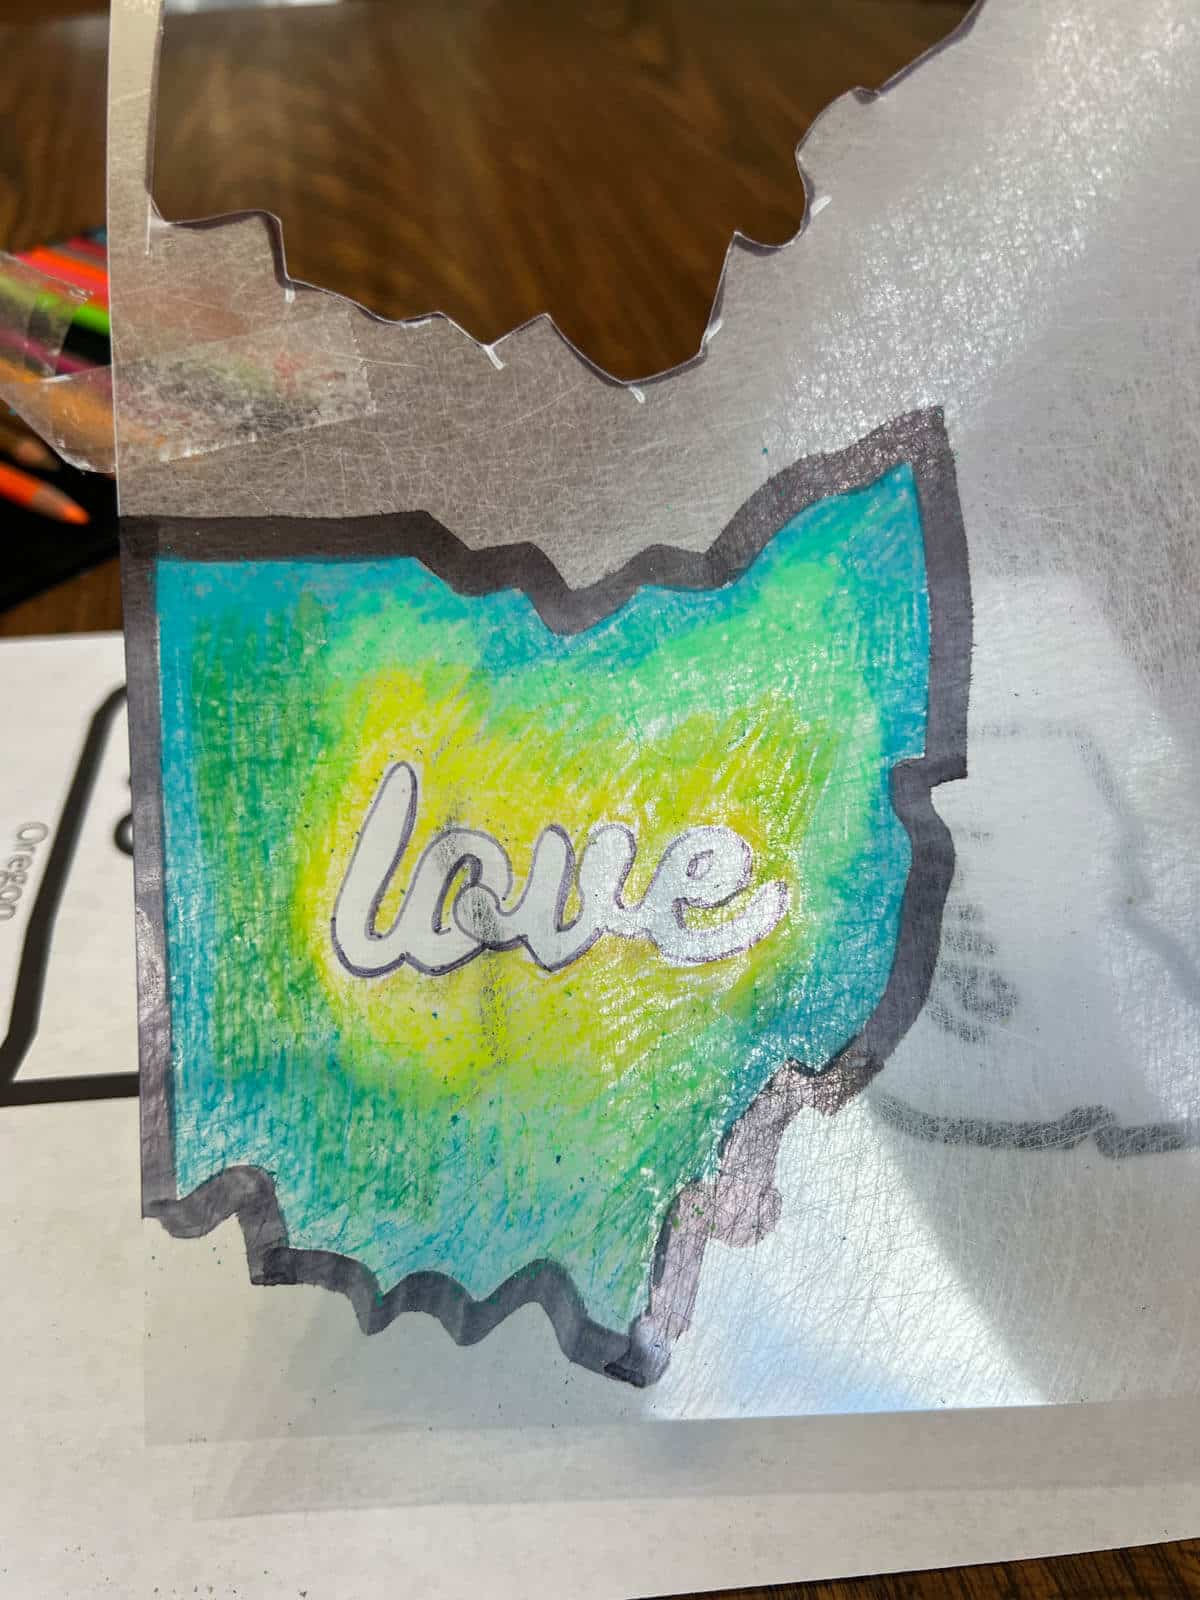 State of Ohio drawing on shrink film with green and yellow colored pencil design.